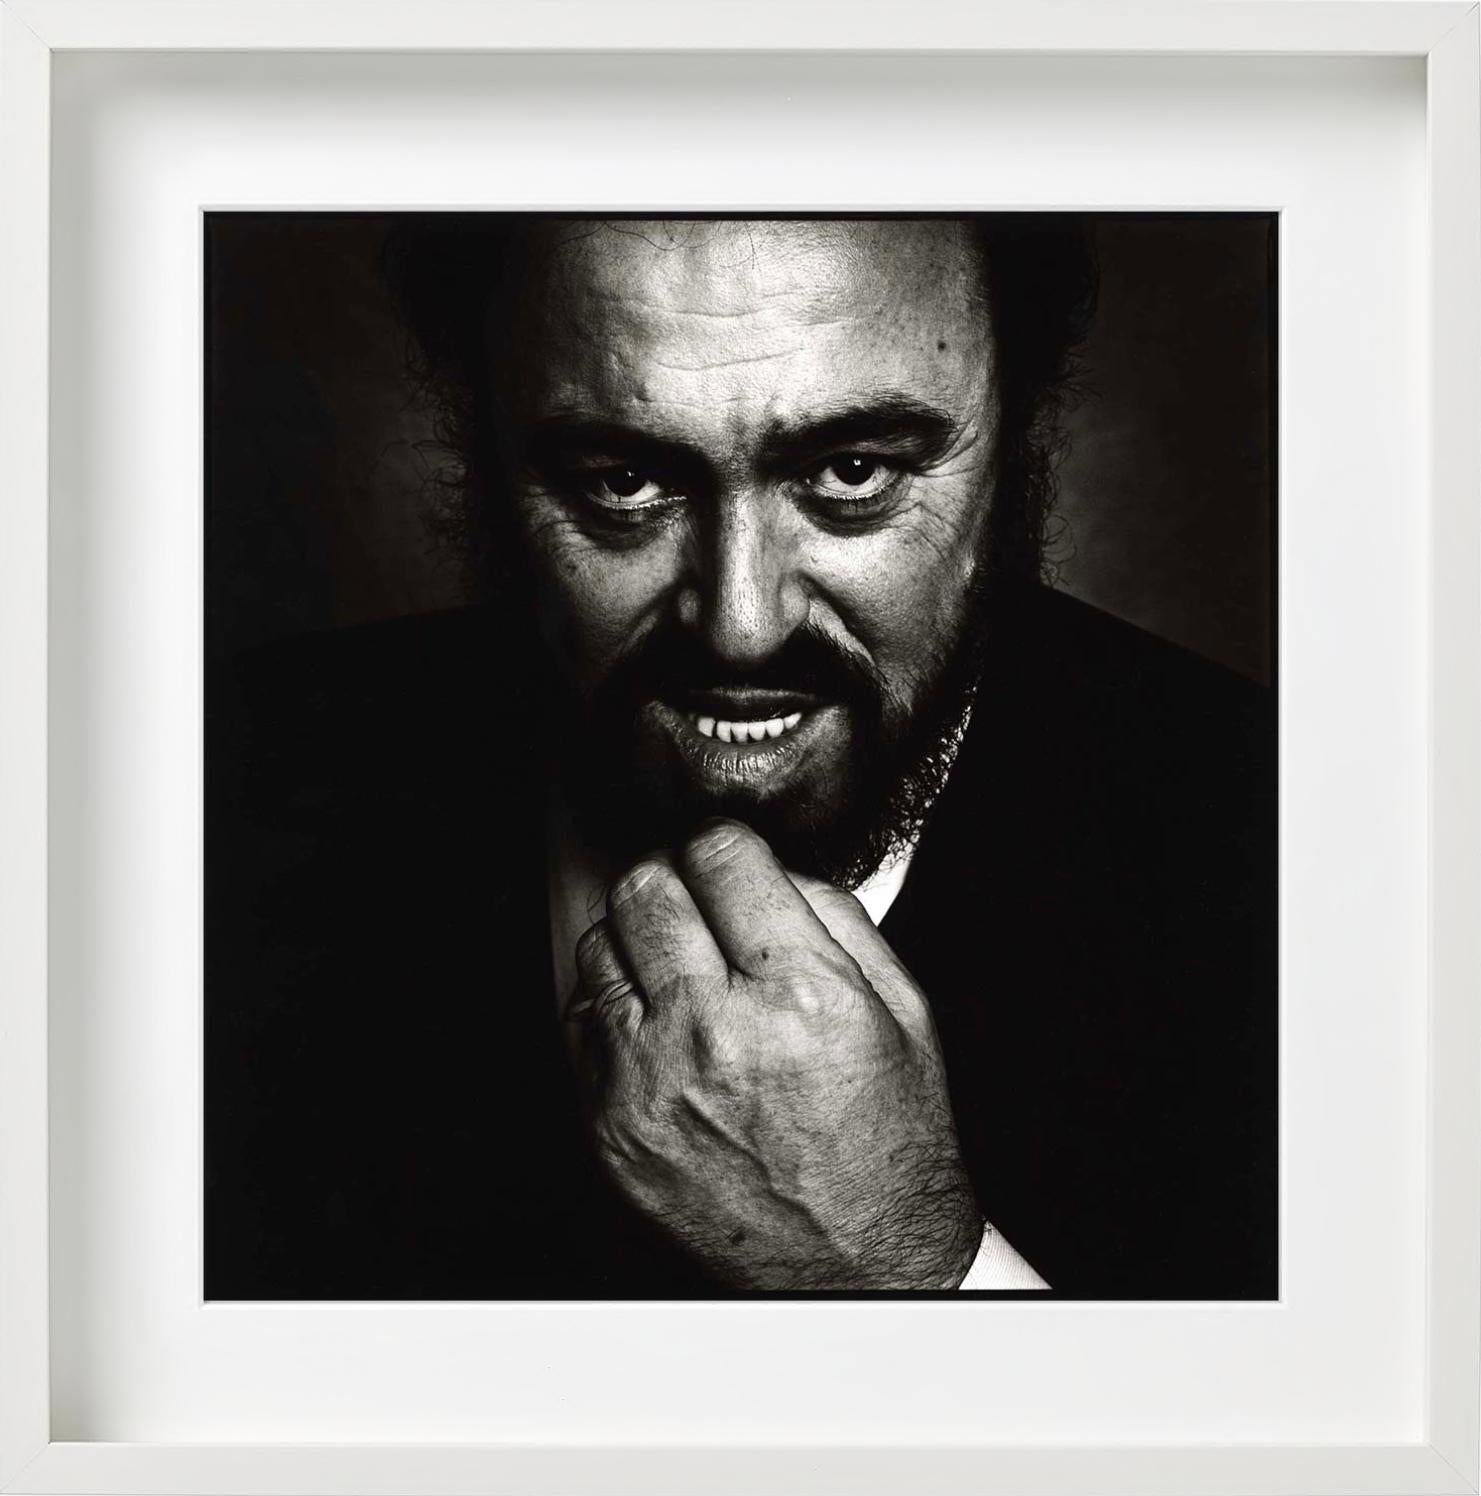 Closeup black and white portrait of the famous opera singer Luciano Pavarotti, photographed by Nigel Parry.

All prints are limited edition. Available in multiple sizes. High-end framing on request.

All prints are done and signed by the artist. The